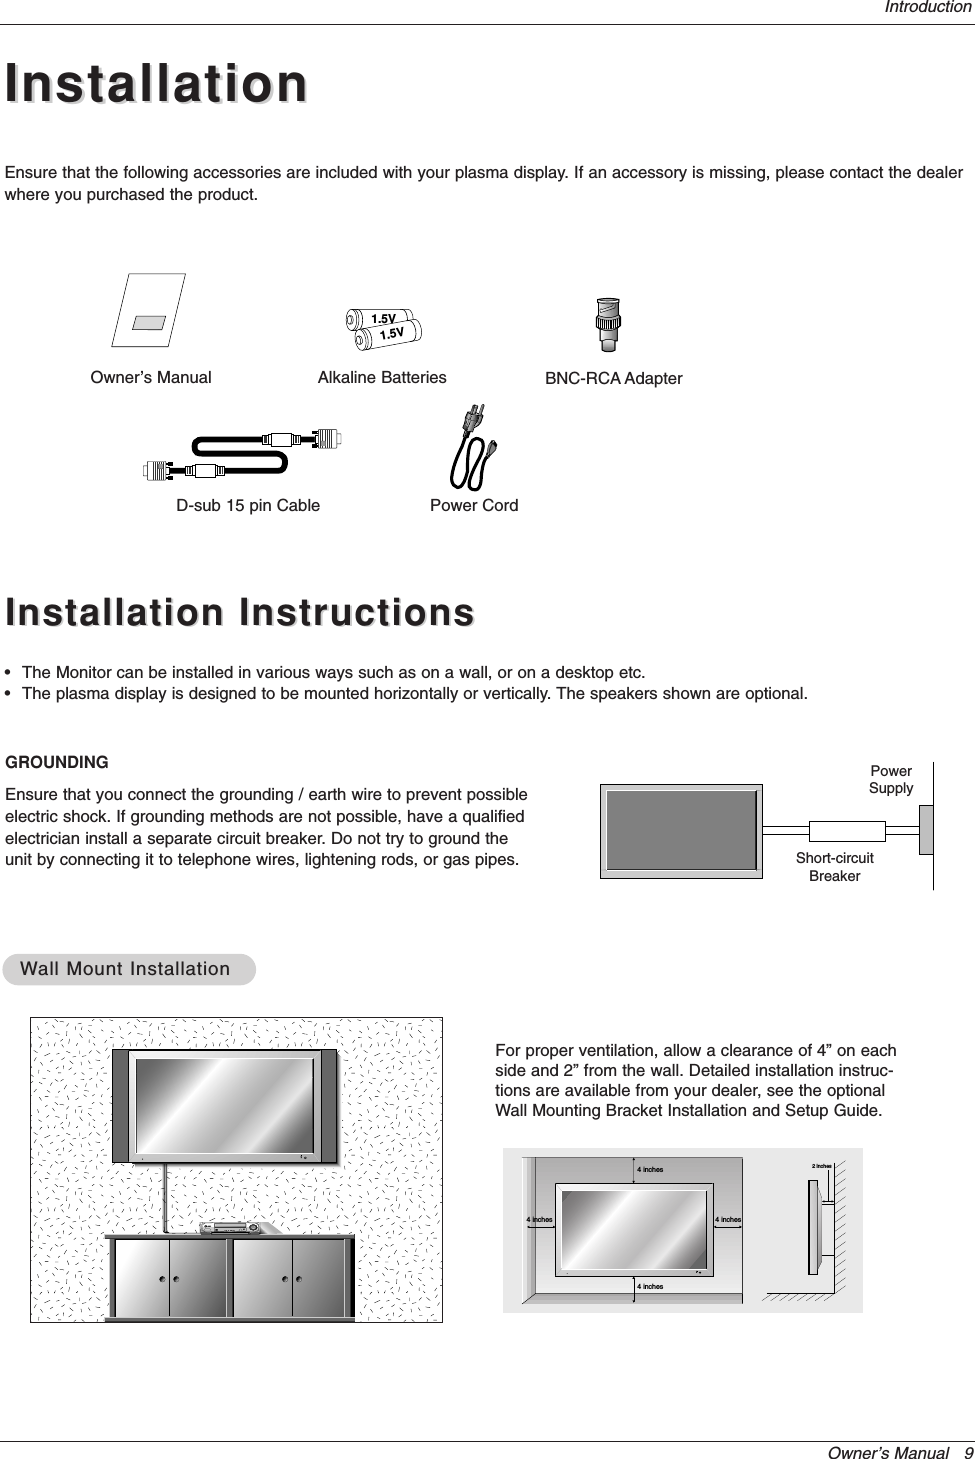 Owner’s Manual   9IntroductionInstallationInstallationD-sub 15 pin CableOwner’s Manual1.5V1.5VAlkaline Batteries BNC-RCA AdapterPower CordEnsure that the following accessories are included with your plasma display. If an accessory is missing, please contact the dealerwhere you purchased the product.Installation InstructionsInstallation Instructions•The Monitor can be installed in various ways such as on a wall, or on a desktop etc.•The plasma display is designed to be mounted horizontally or vertically. The speakers shown are optional.GROUNDINGEnsure that you connect the grounding / earth wire to prevent possibleelectric shock. If grounding methods are not possible, have a qualifiedelectrician install a separate circuit breaker. Do not try to ground theunit by connecting it to telephone wires, lightening rods, or gas pipes.PowerSupplyShort-circuitBreaker4 inches4 inches4 inches4 inches2 inchesWWall Mount Installationall Mount InstallationFor proper ventilation, allow a clearance of 4” on eachside and 2” from the wall. Detailed installation instruc-tions are available from your dealer, see the optionalWall Mounting Bracket Installation and Setup Guide.